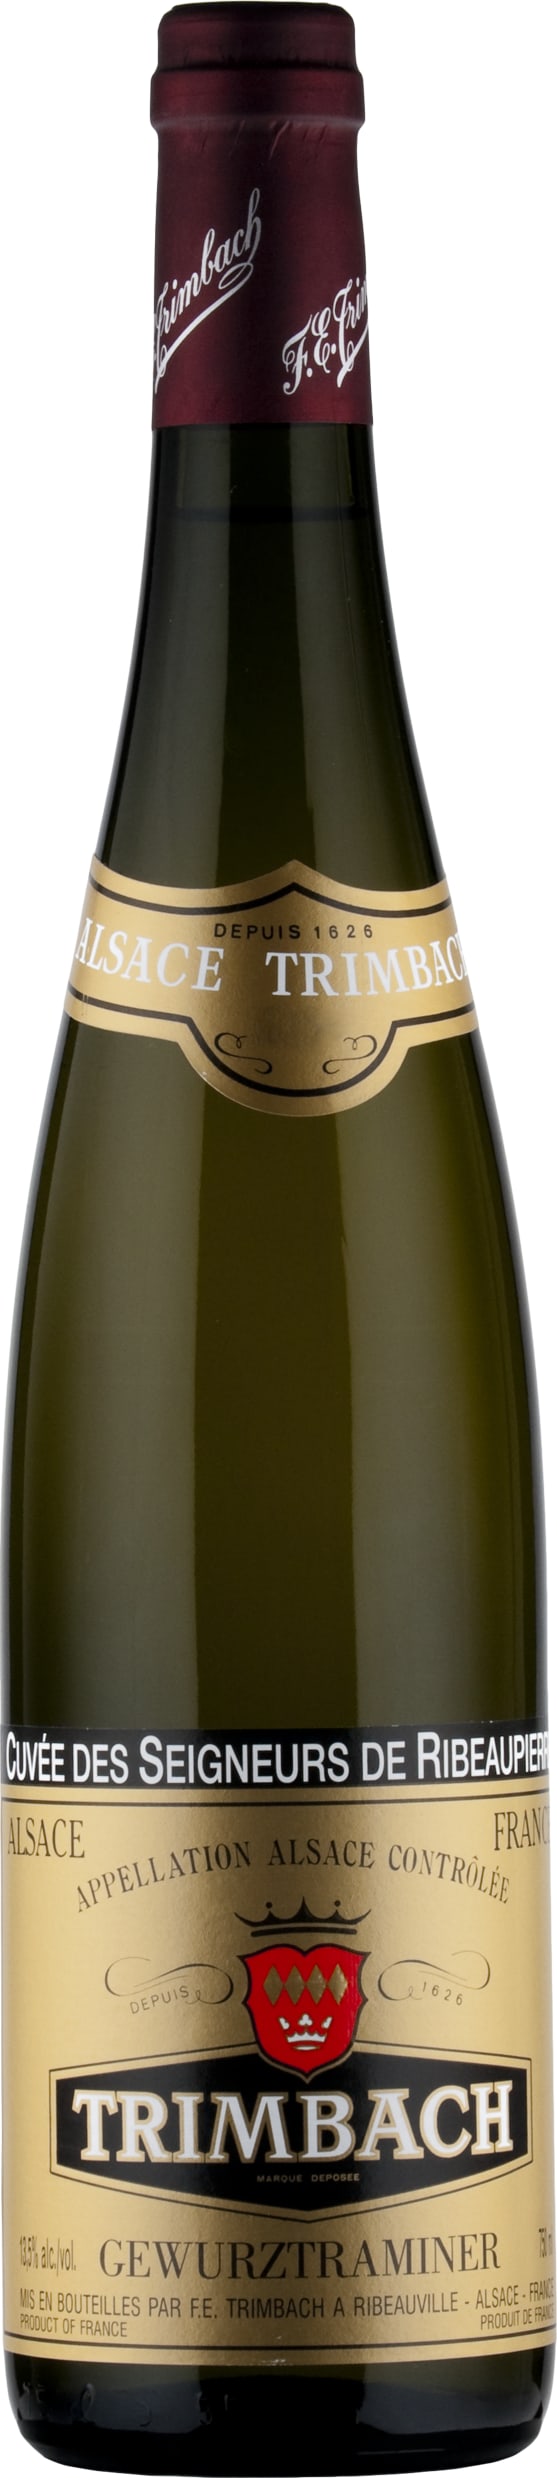 Trimbach Gewurztraminer Cuvee des Seigneurs de Ribeaupierre 2015 75cl - Buy Trimbach Wines from GREAT WINES DIRECT wine shop